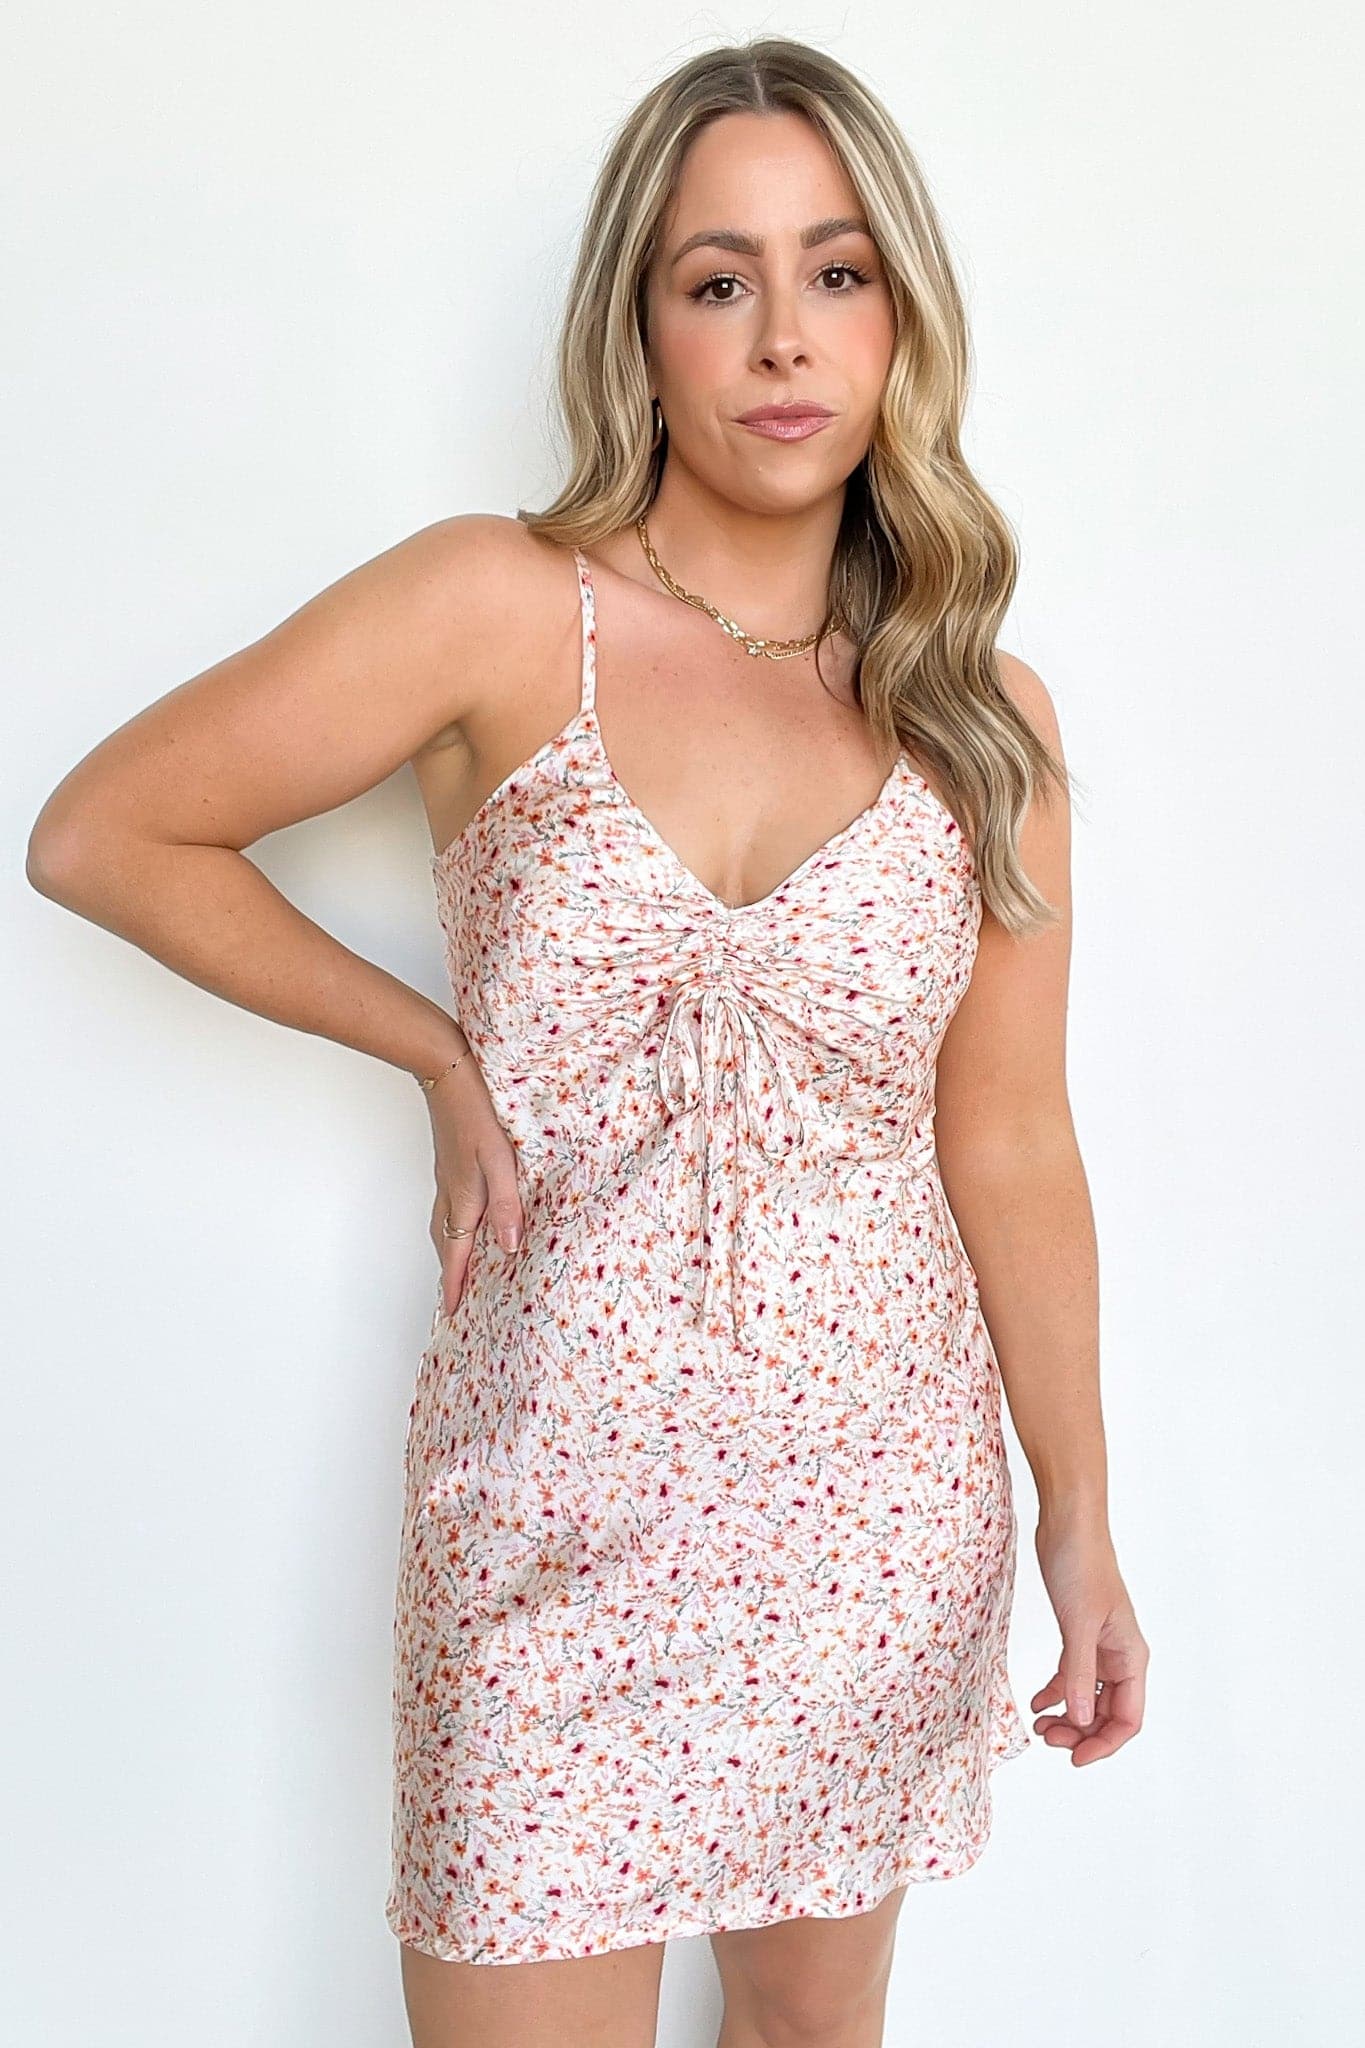  Delightful Darling Floral Ruched Front Dress - FINAL SALE - Madison and Mallory